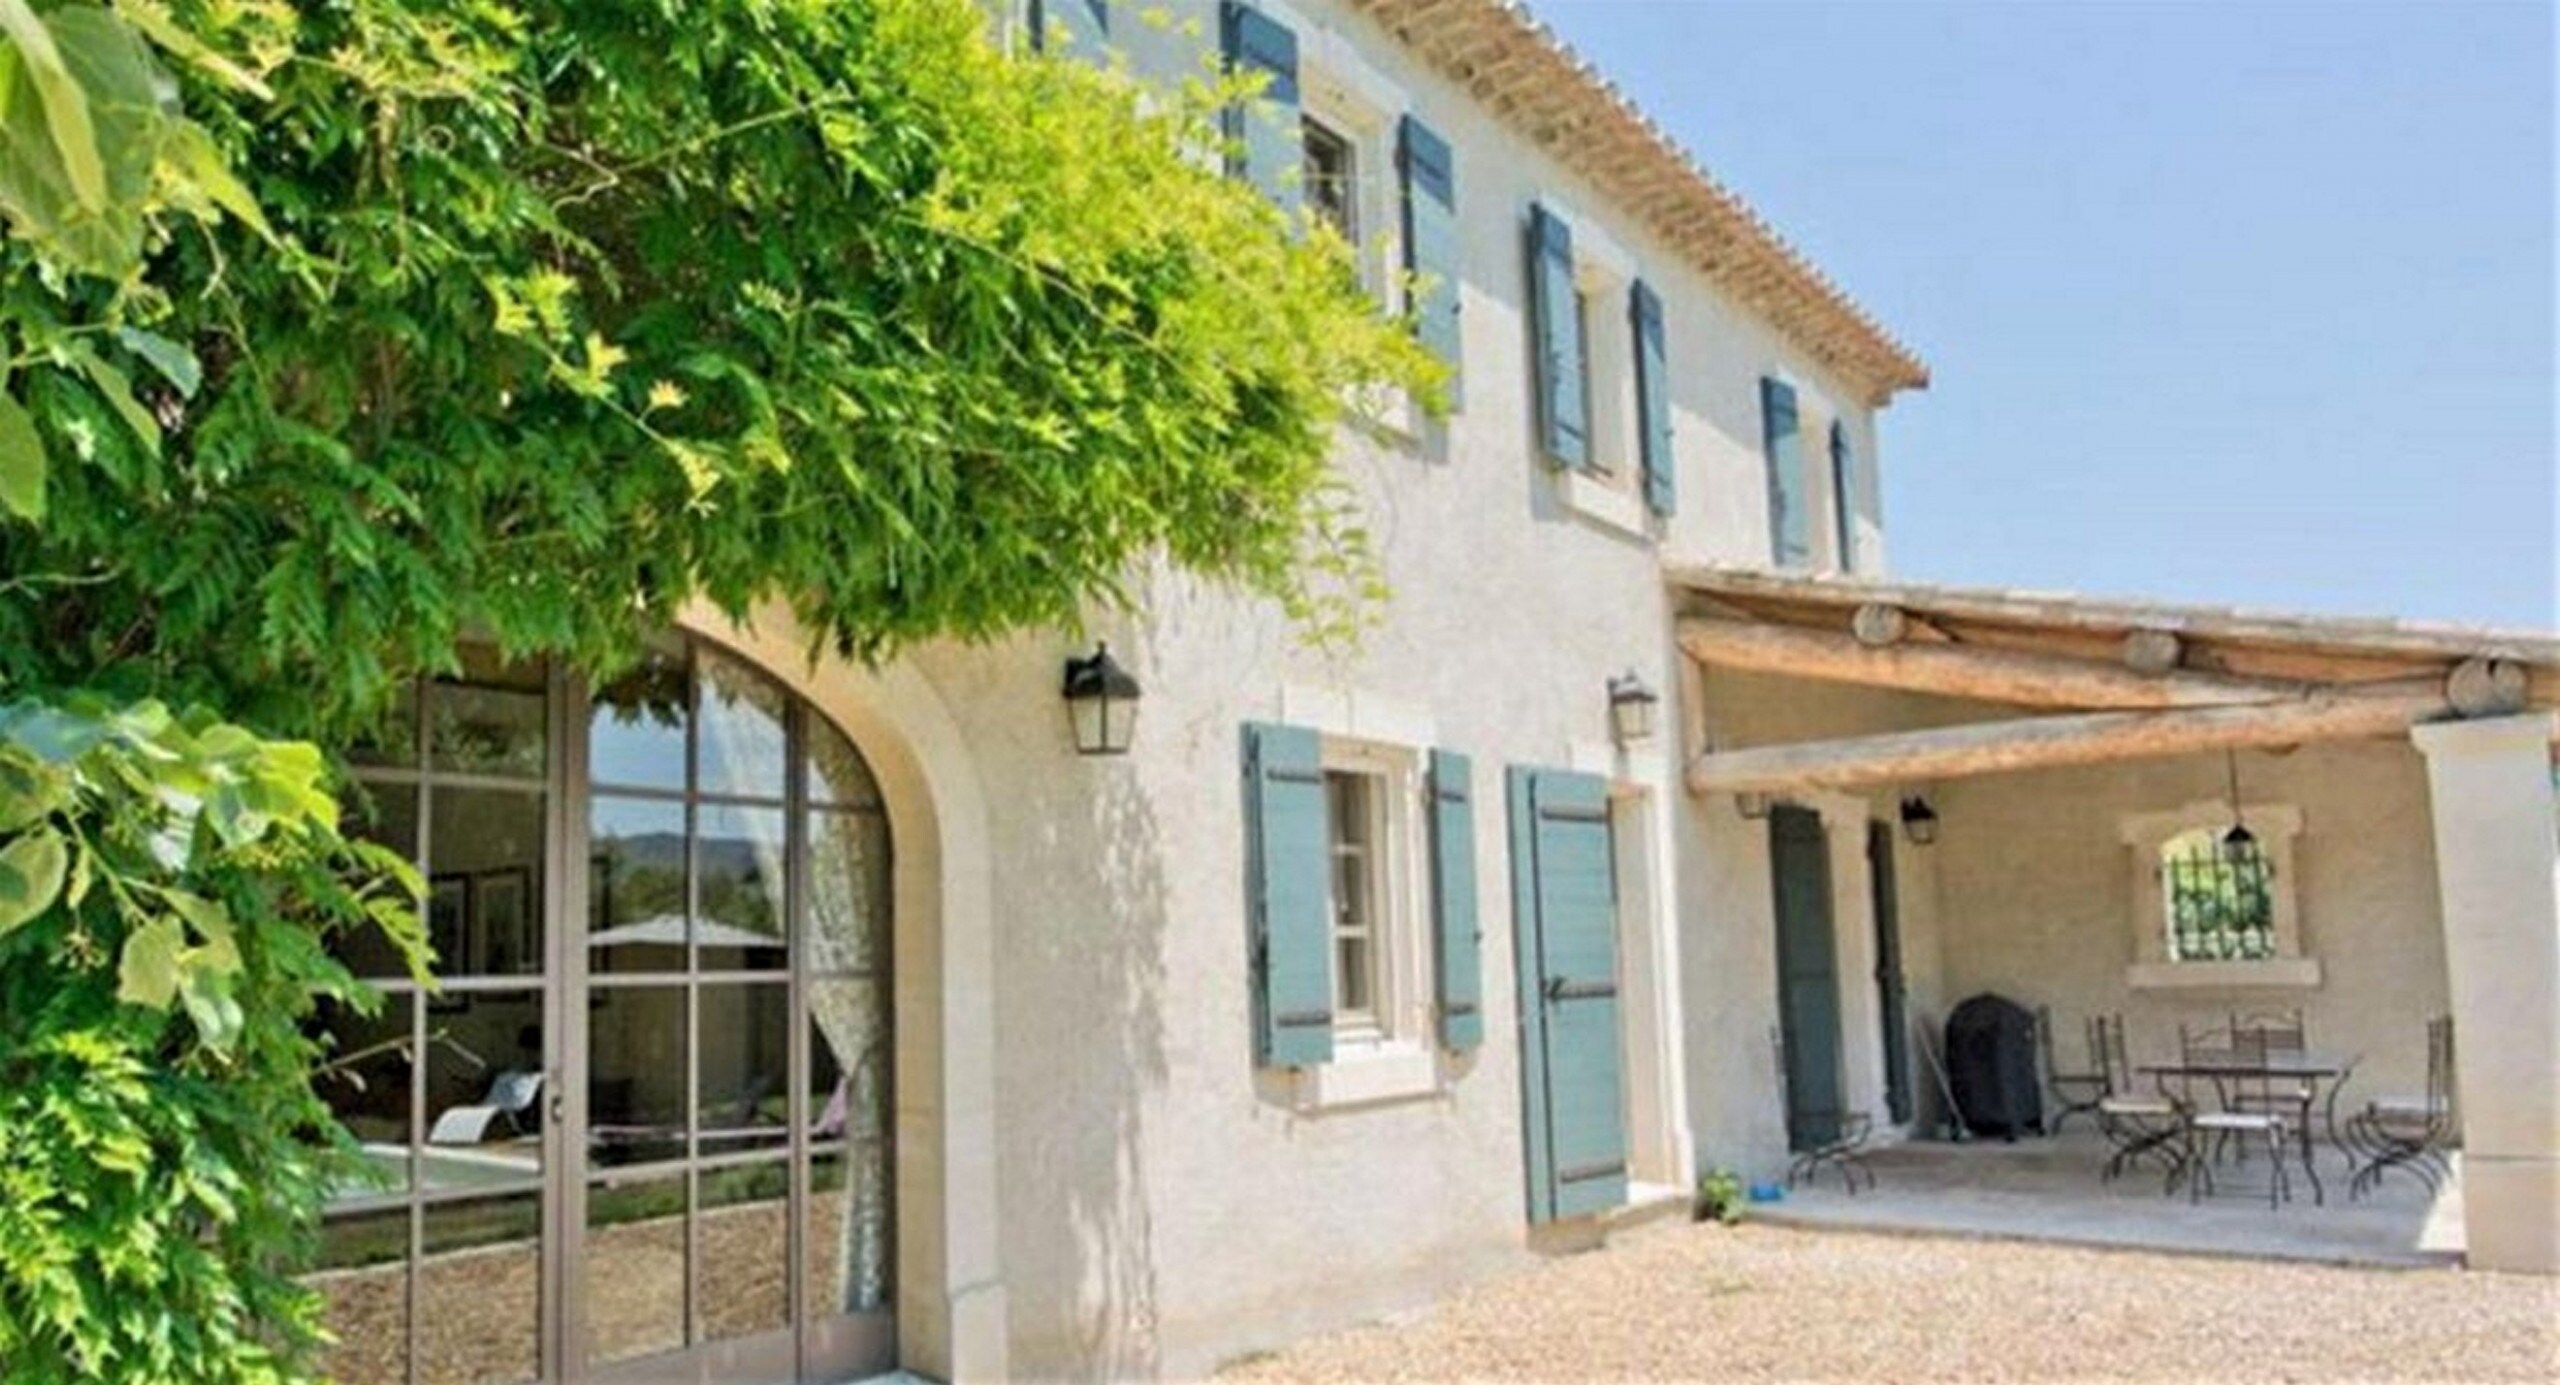 Lovely spacious 4-bedroom Provencal villa within walking distance of St Remy village centre